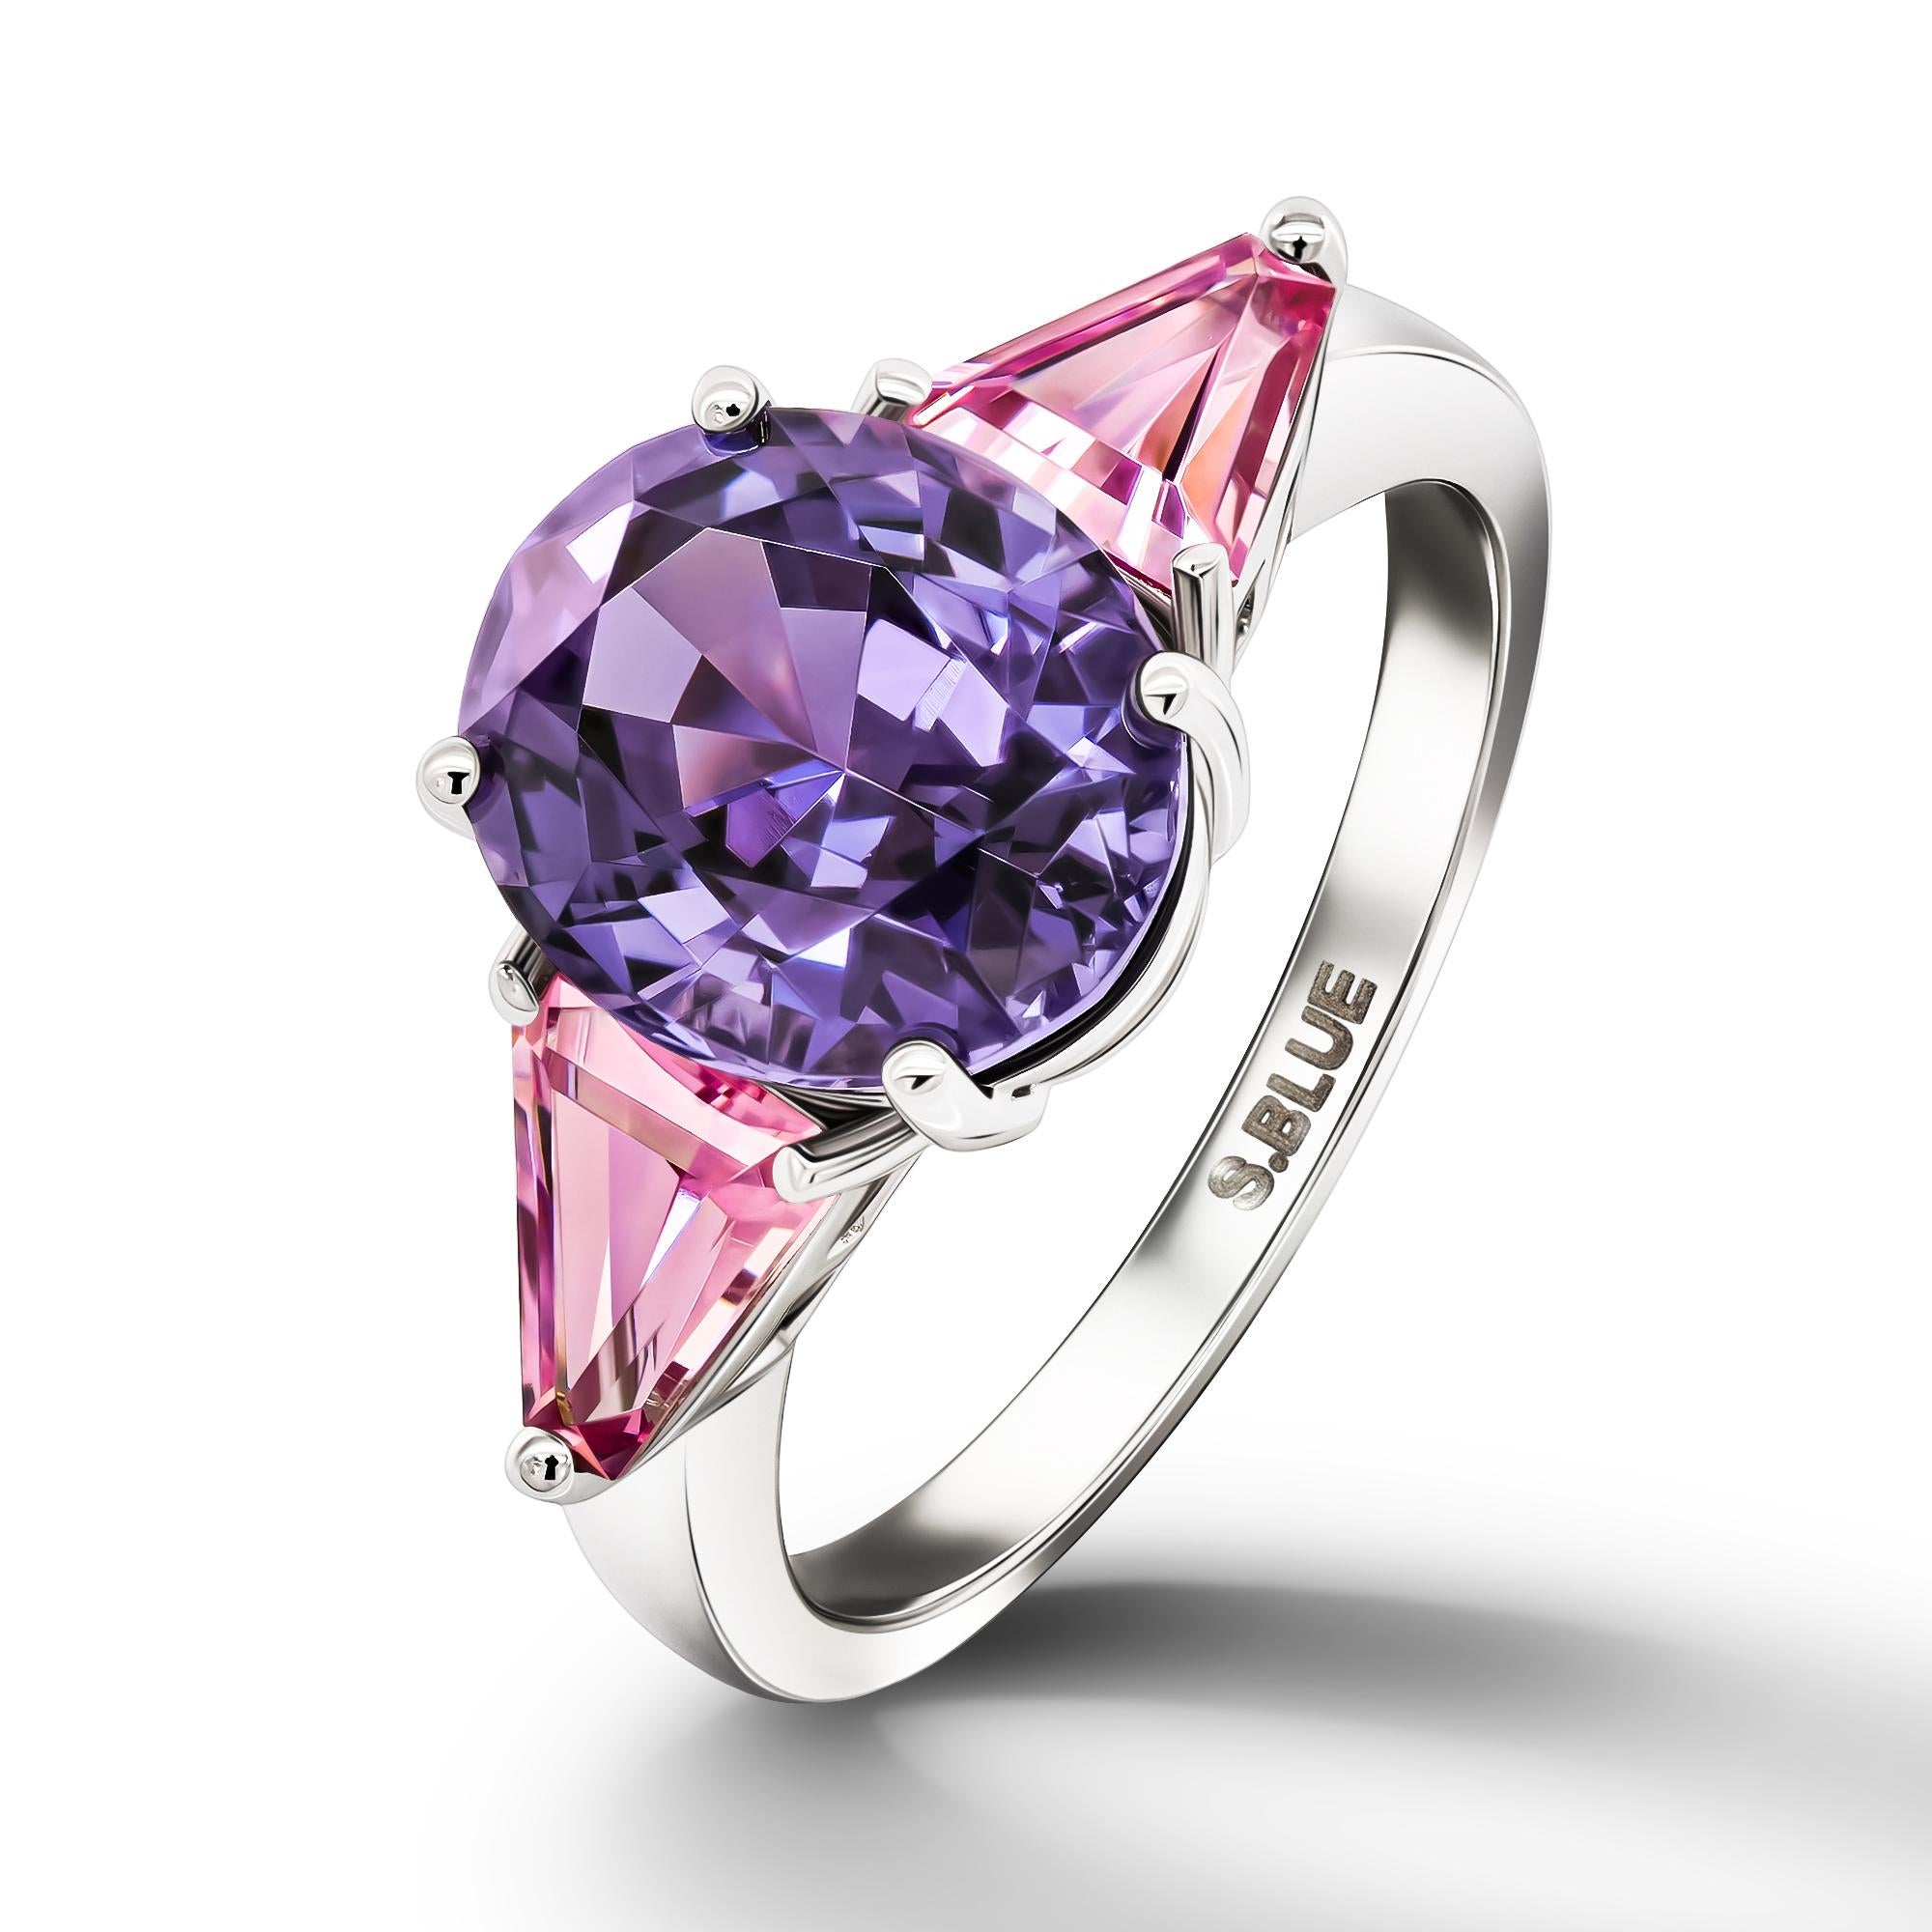 •	18K White Gold.  
•	Violet Spinel in oval cut – total carat weight 3.26.
•	Pink Spinels in triangle cut – total carat weight 0.92.
•	Product weight – 3.62 grams.
•	Ring size – 5.5’.
